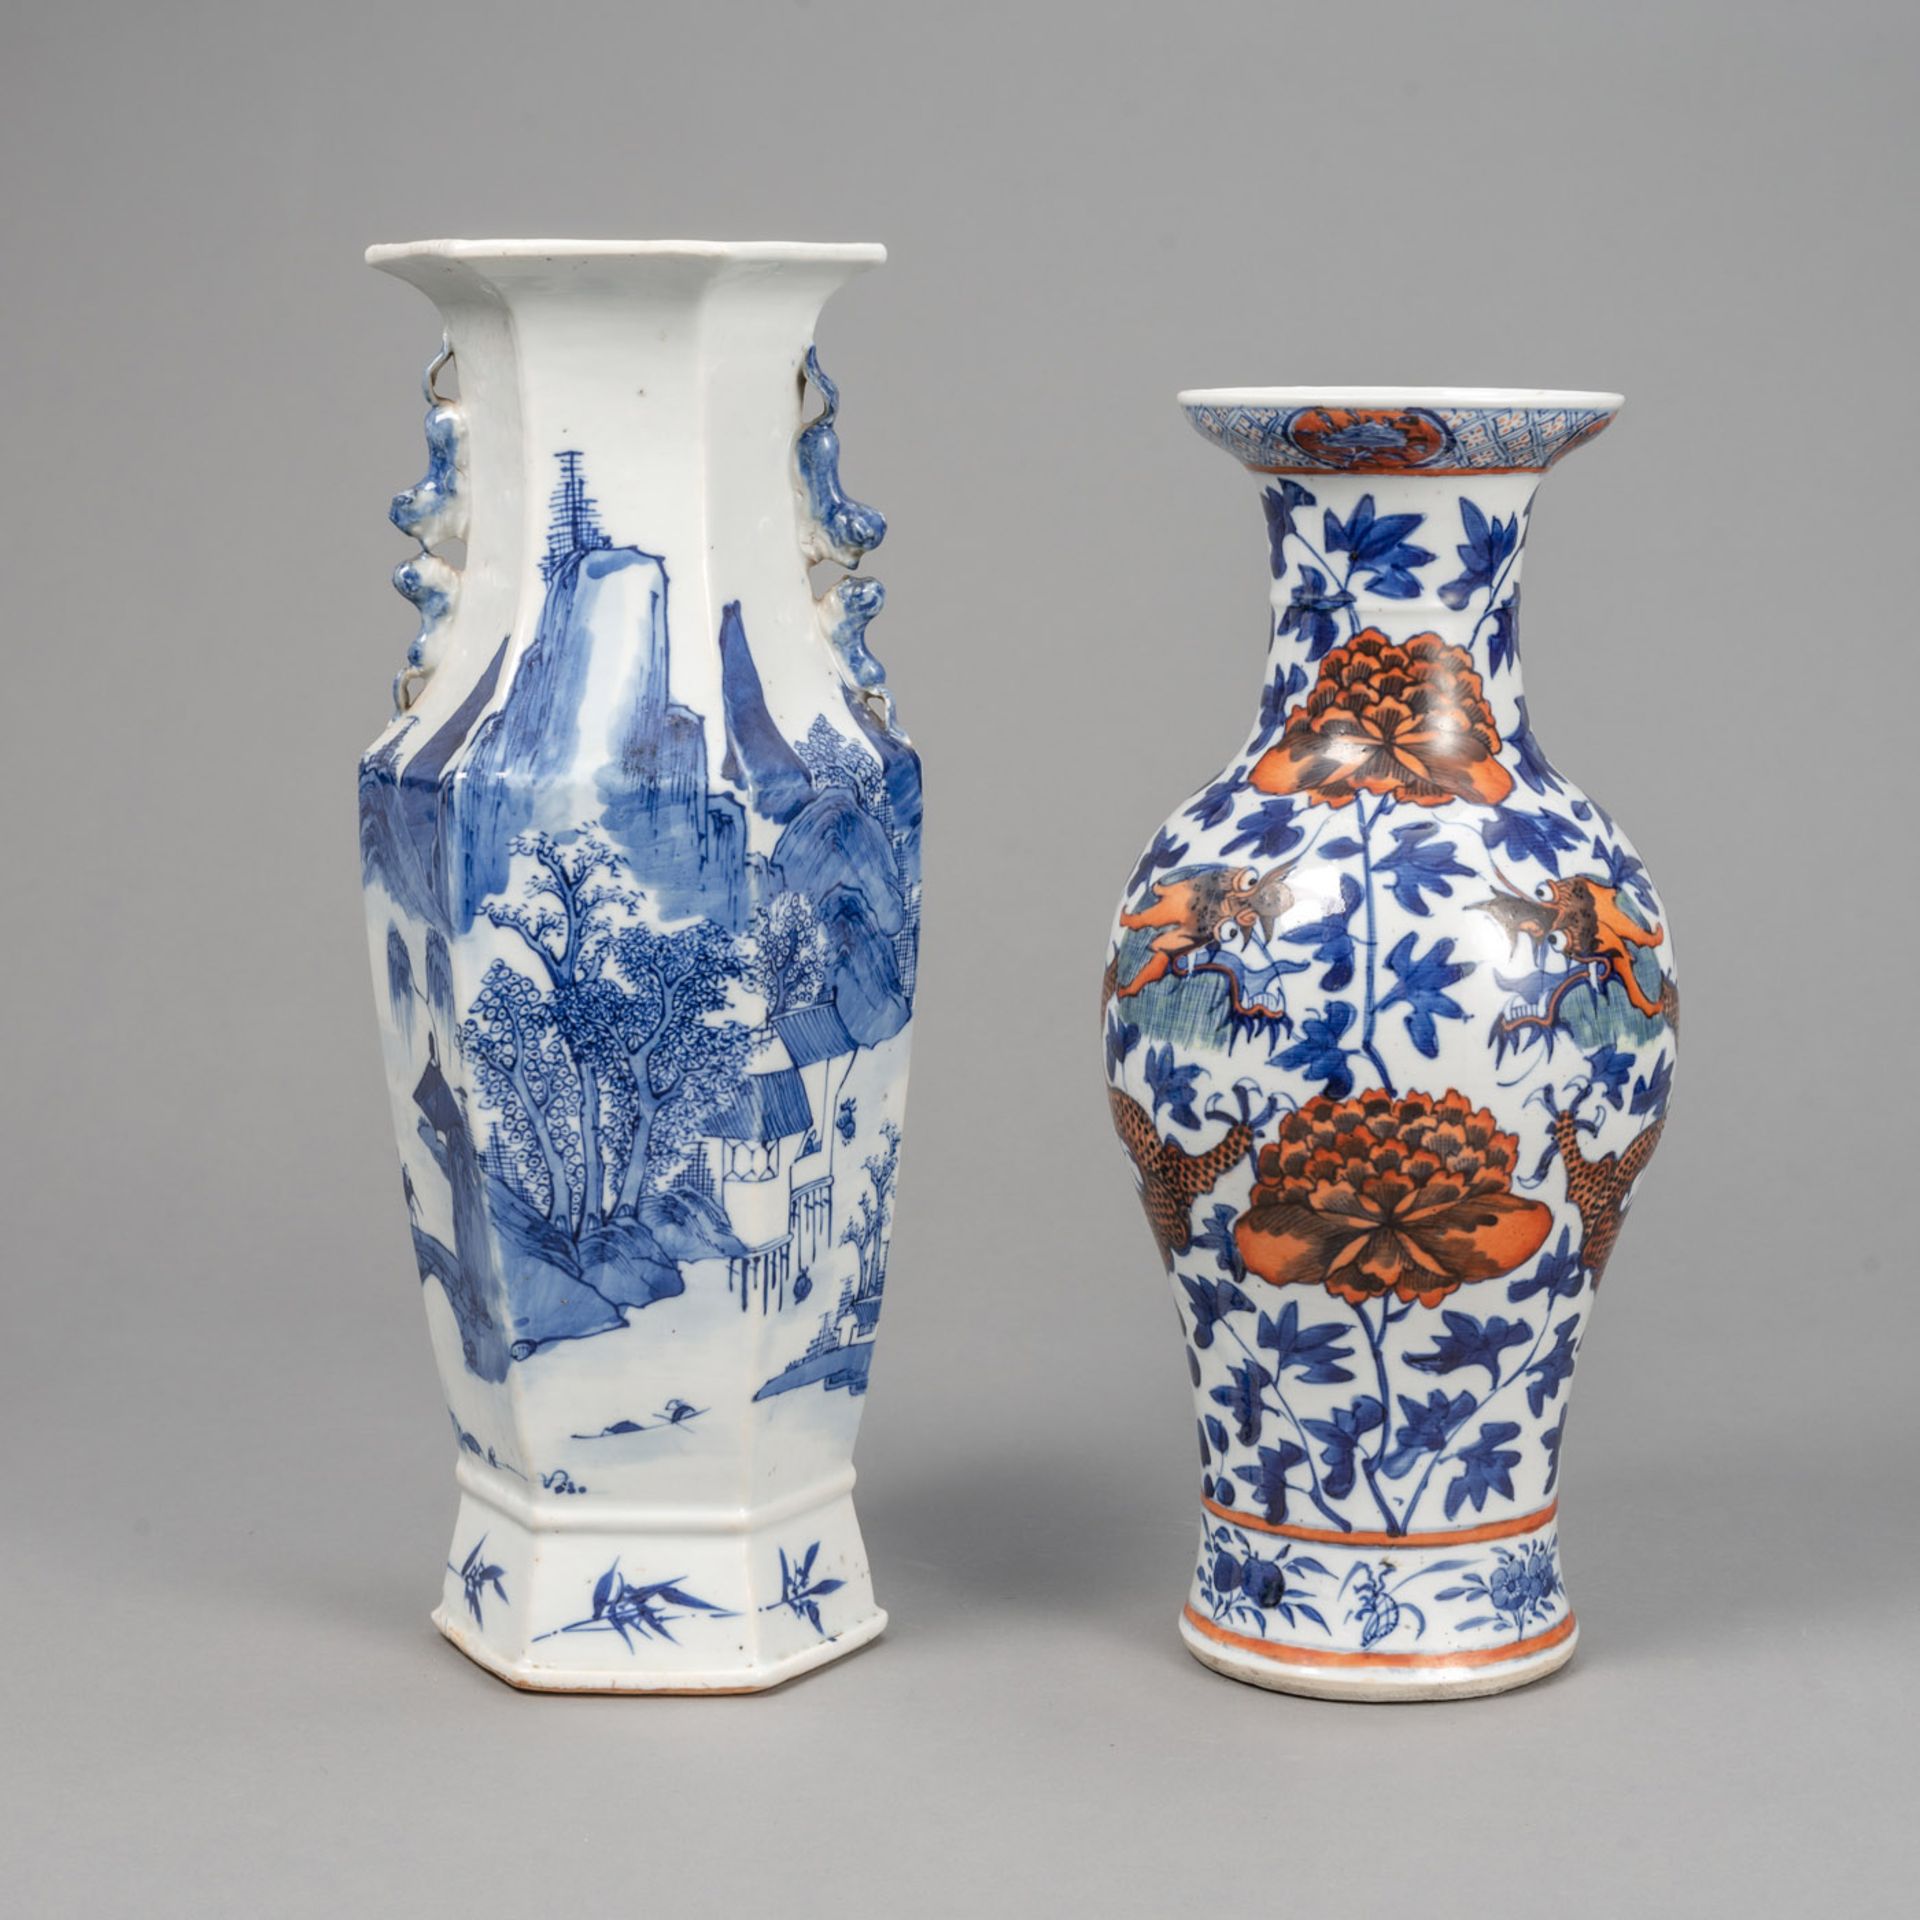 A HEXAGONAL BLUE AND WHITE LANDSCAPE PORCELAIN VASE AND A BLUE AND RED DRAGON VASE